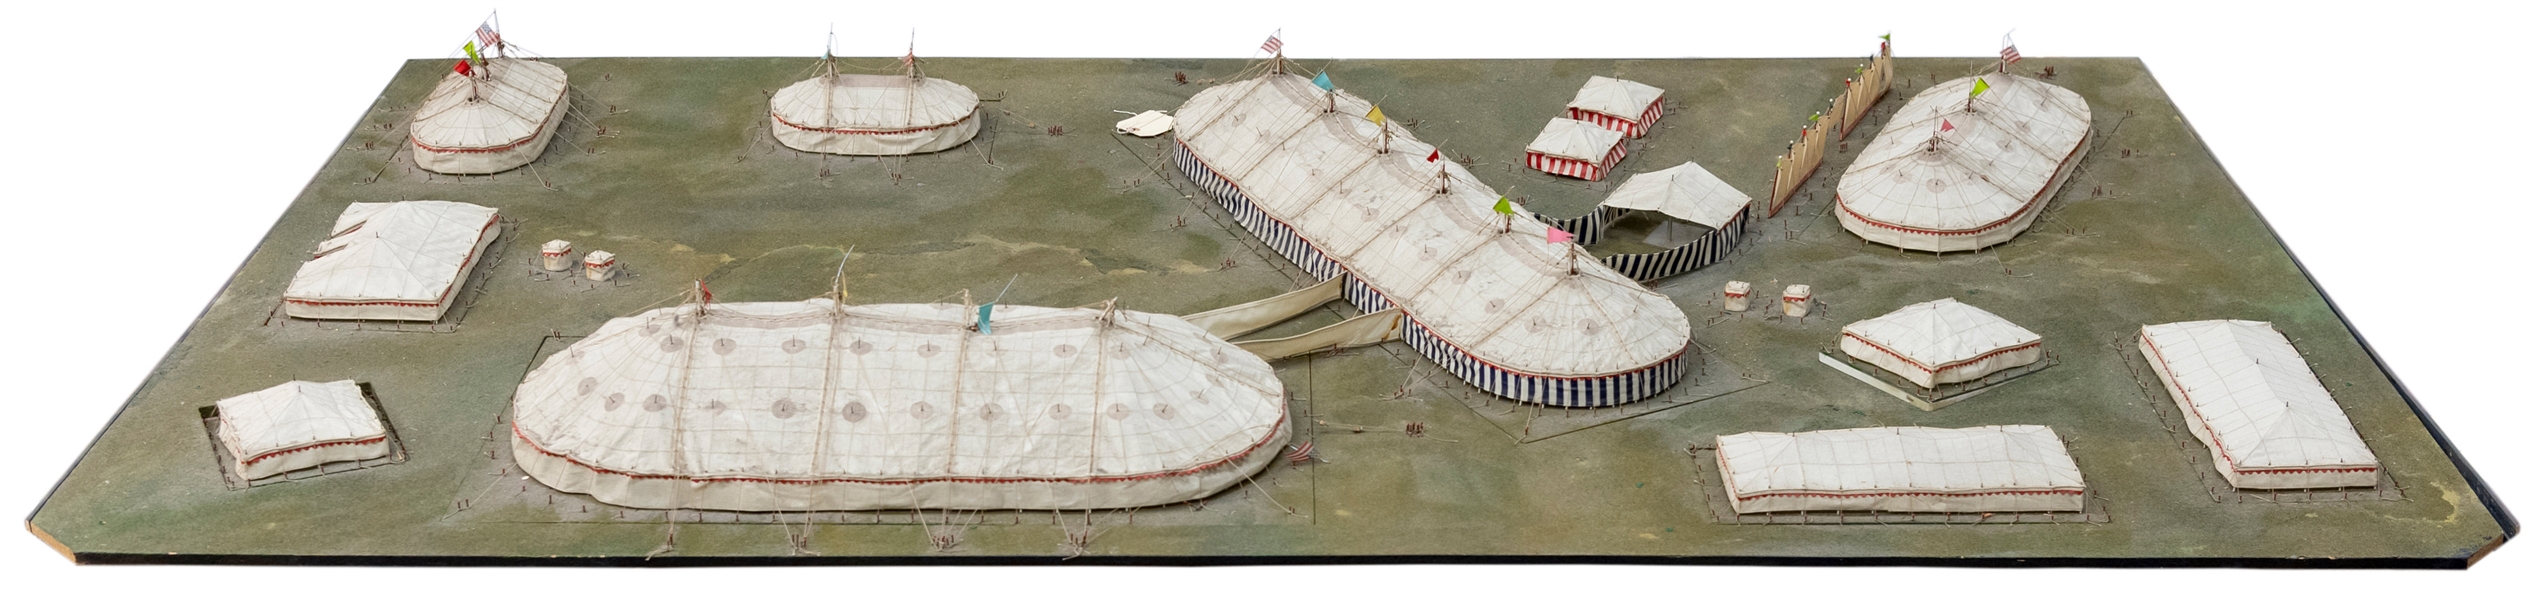  Model Circus Tent Diorama. Finely crafted overview of a cir...